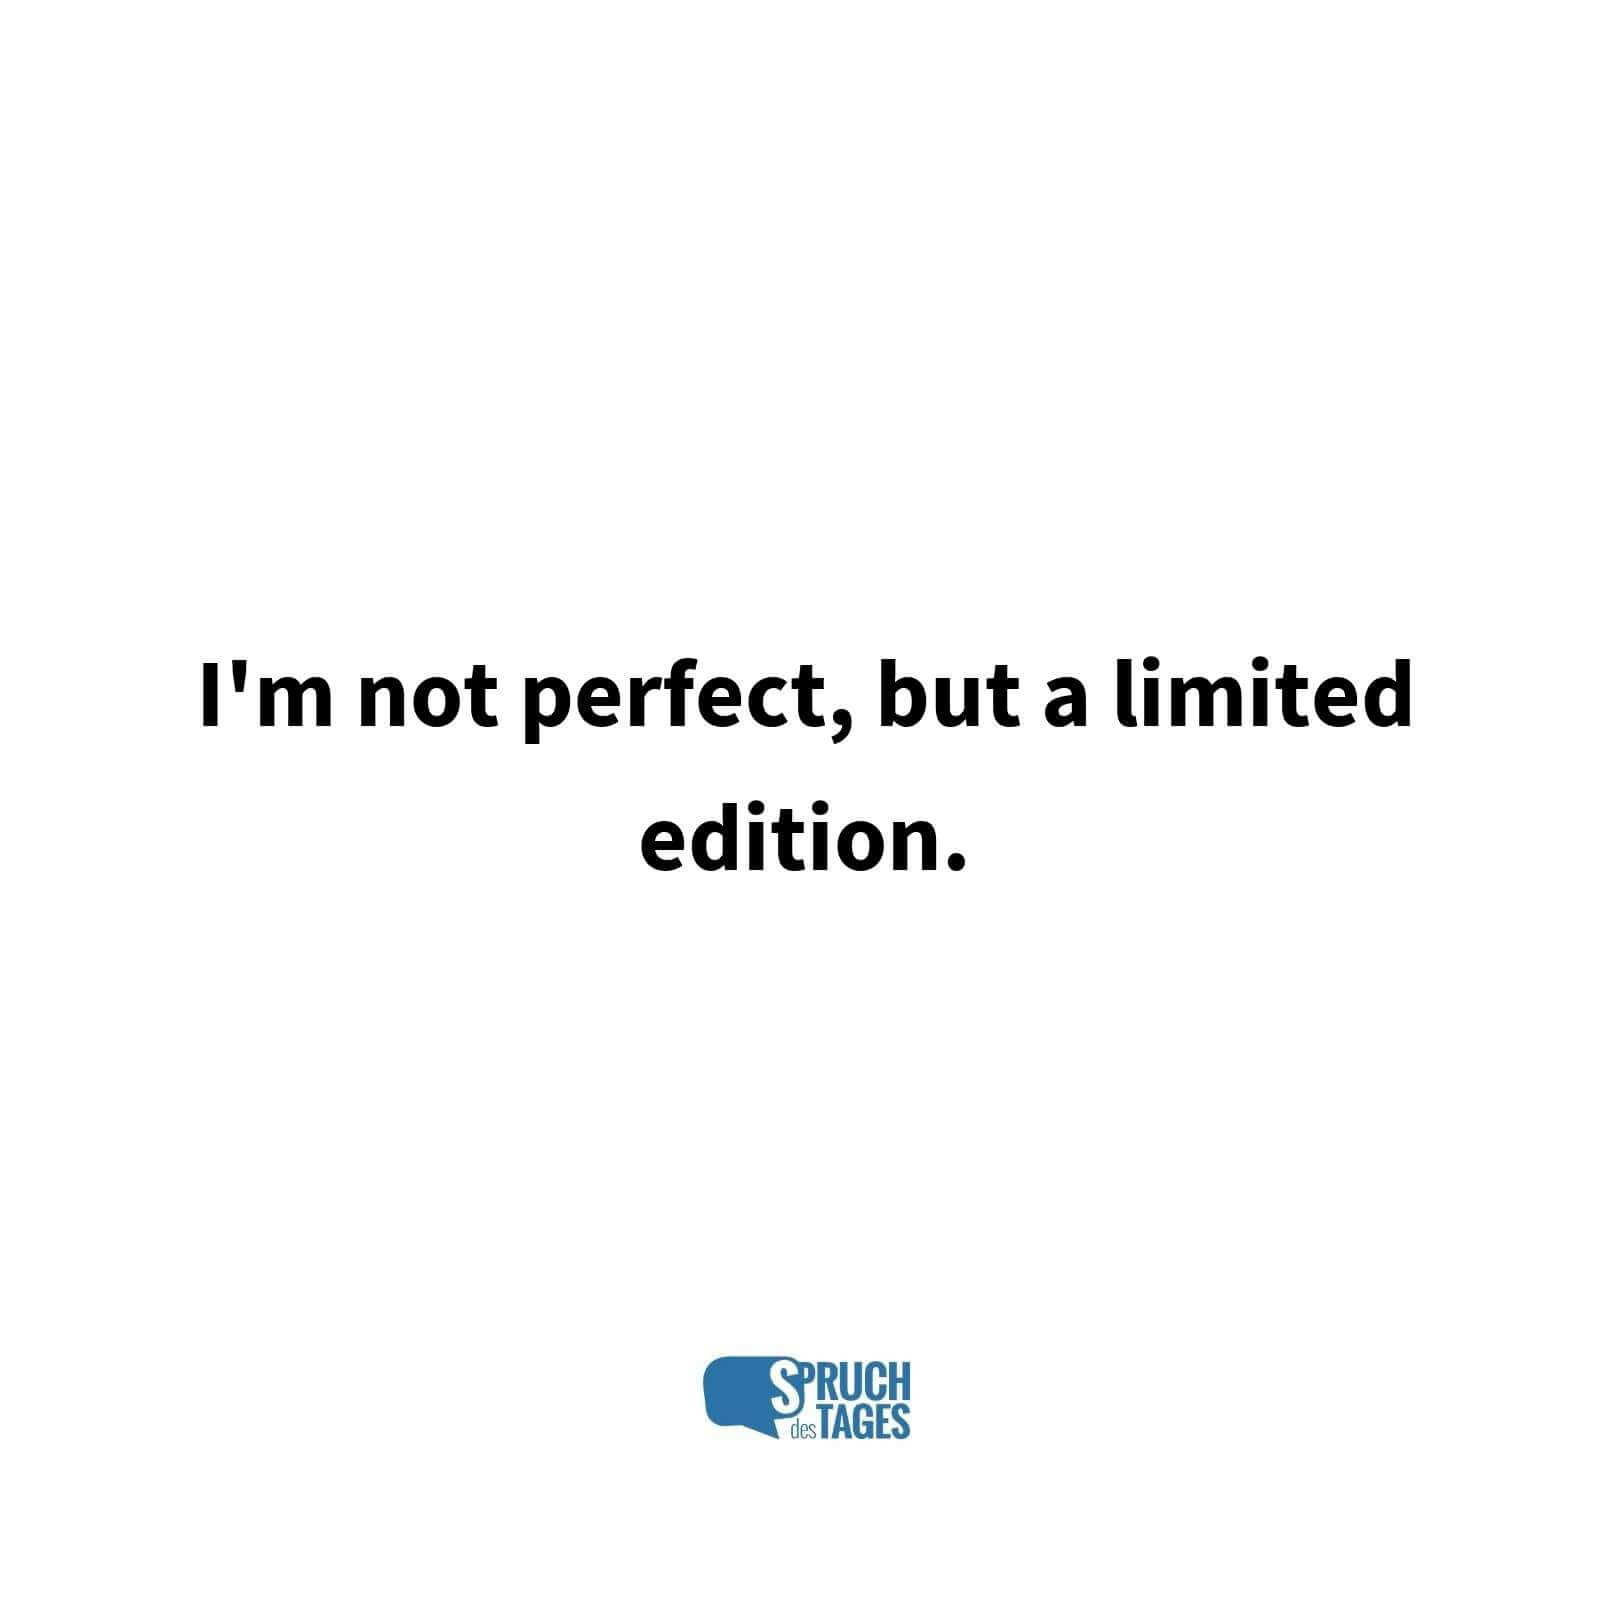 I’m not perfect, but a limited edition.